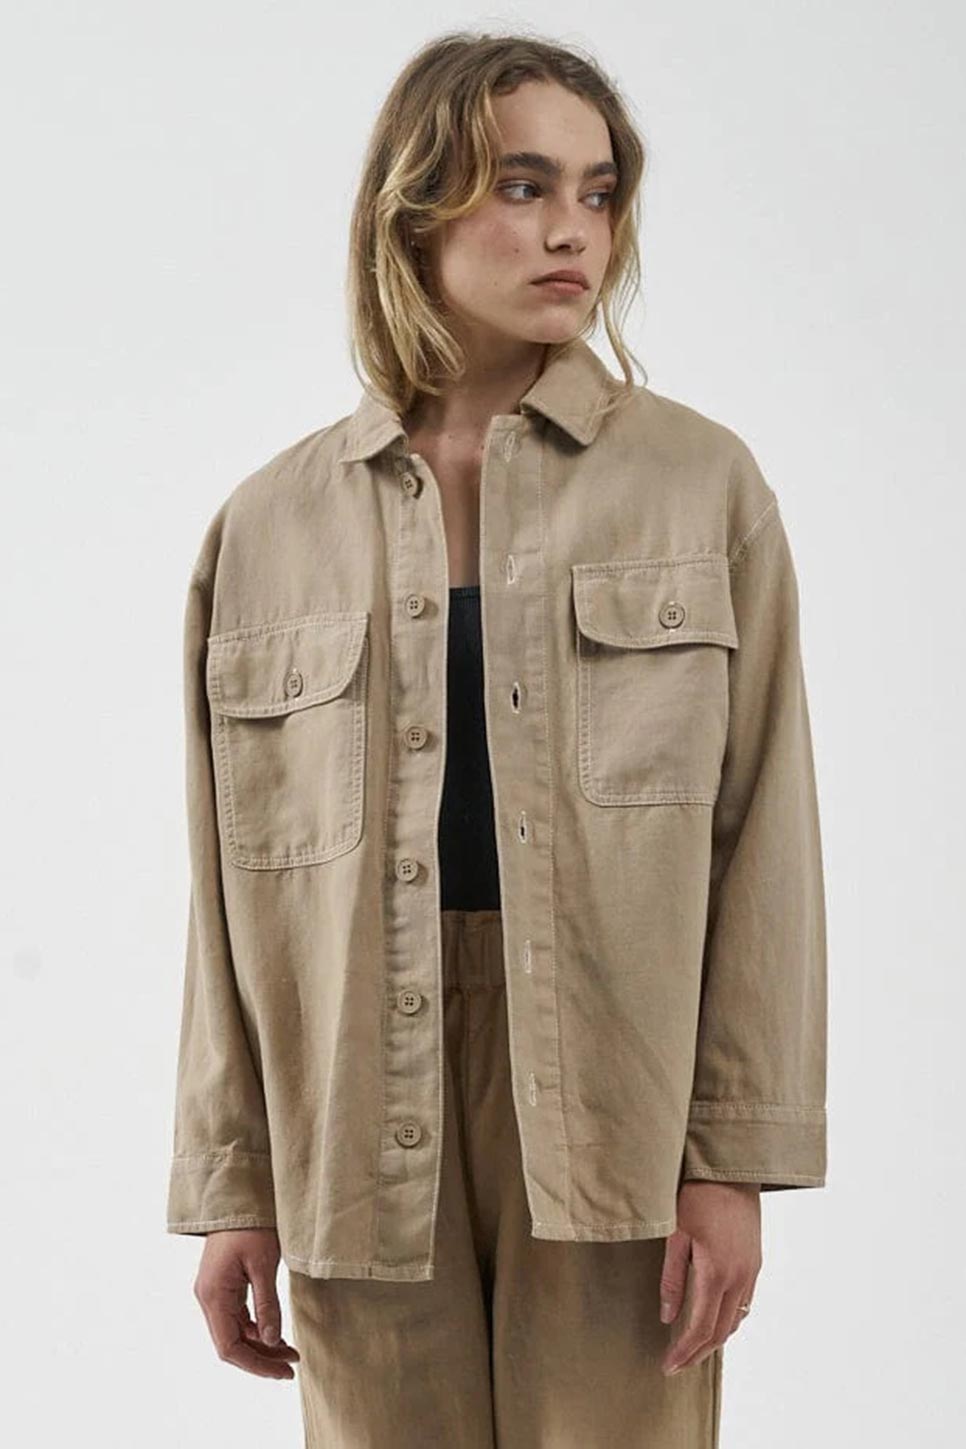 Thrills - Discover Overshirt - Faded Khaki - Front